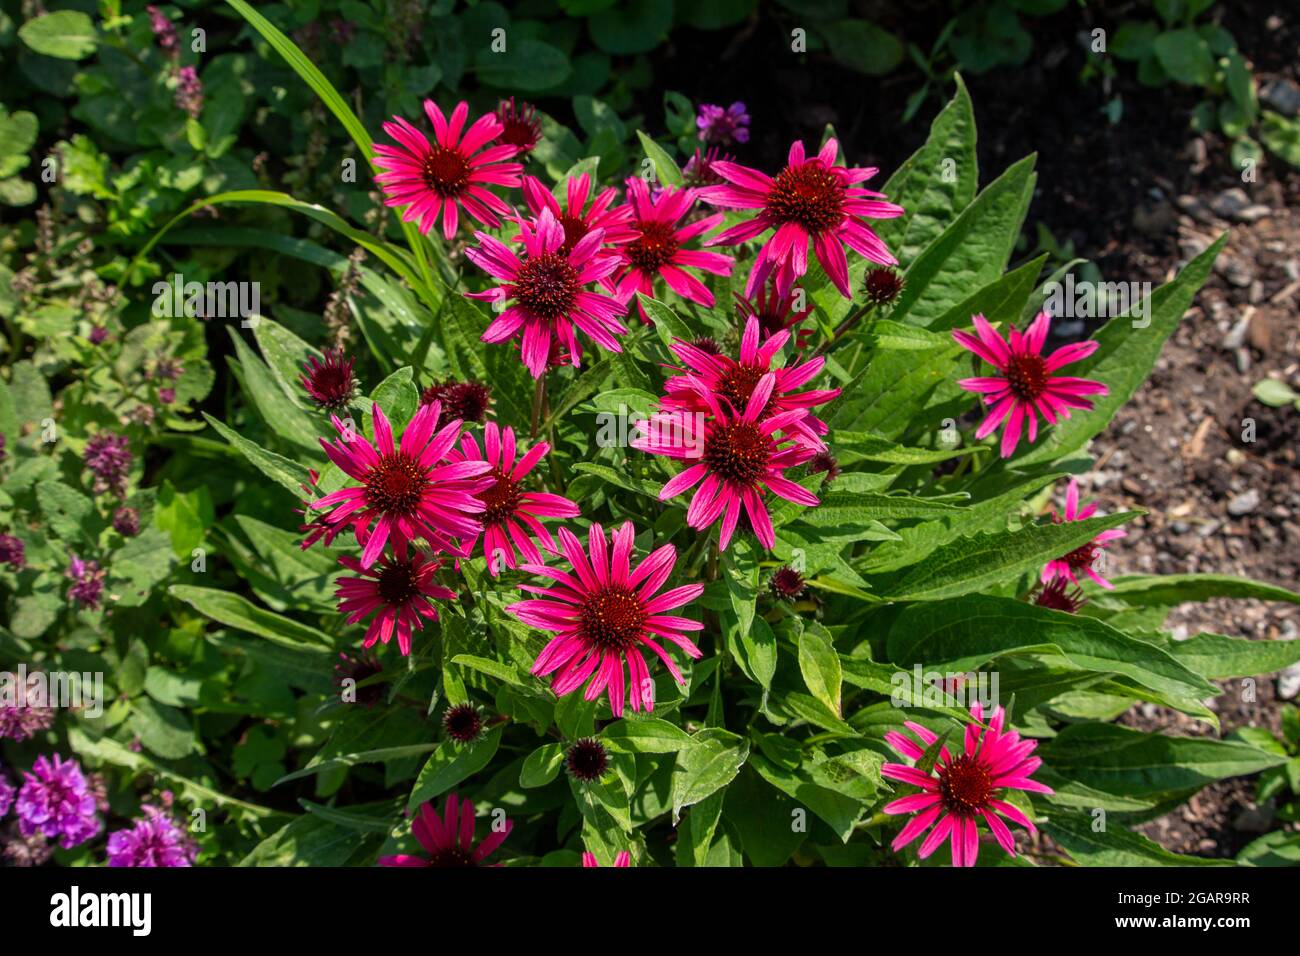 This image shows a close-up view of bright crimson red asters (asteraceae) blooming in a sunny ornamental garden Stock Photo